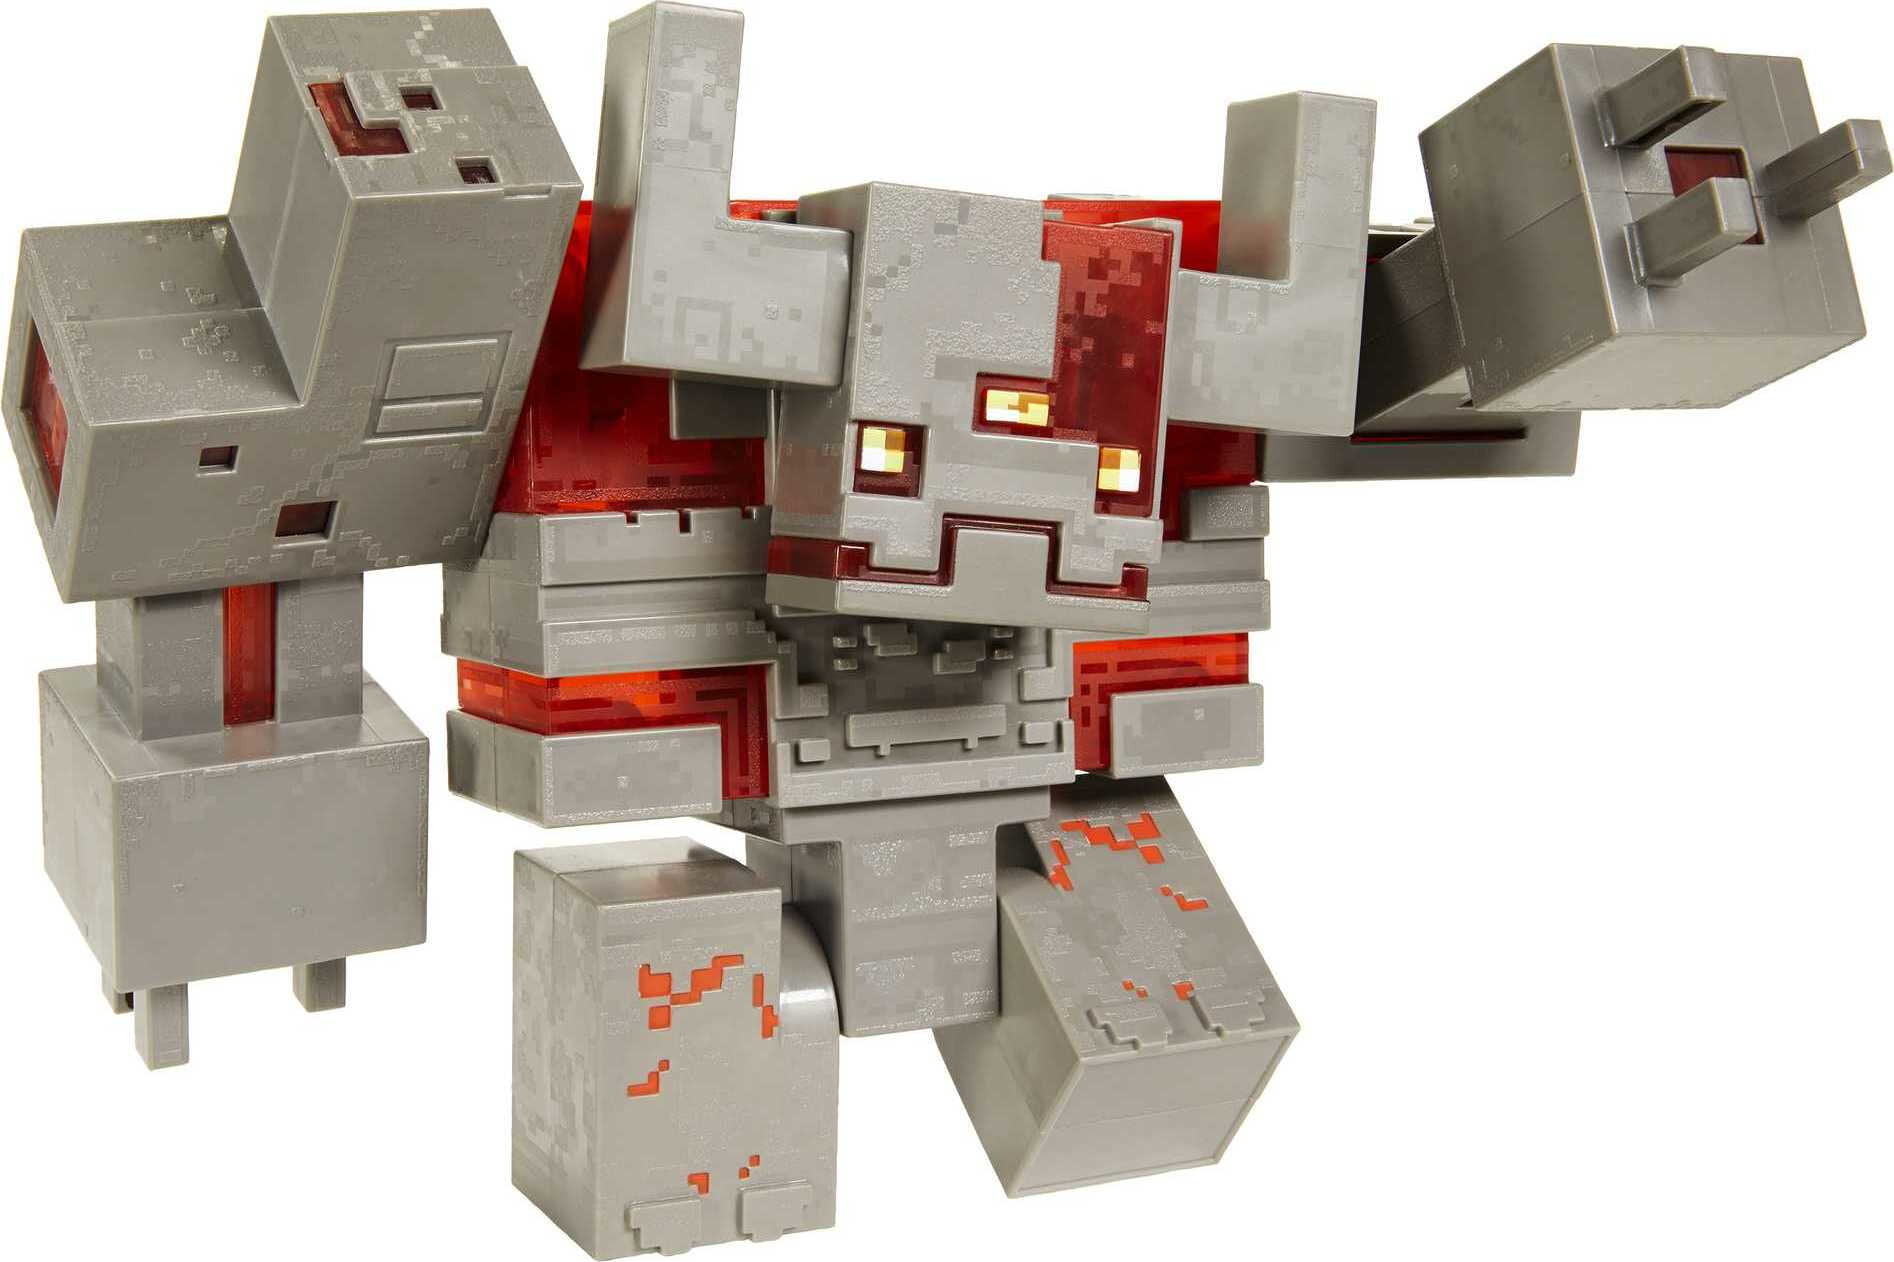 Minecraft Dungeons Redstone Monstrosity, Large Battle Figure (10 Inch By 7.3 Inch), Action And Adventure Toy Based On Video Game, Gift For Kids Age 6 And Older​​​​